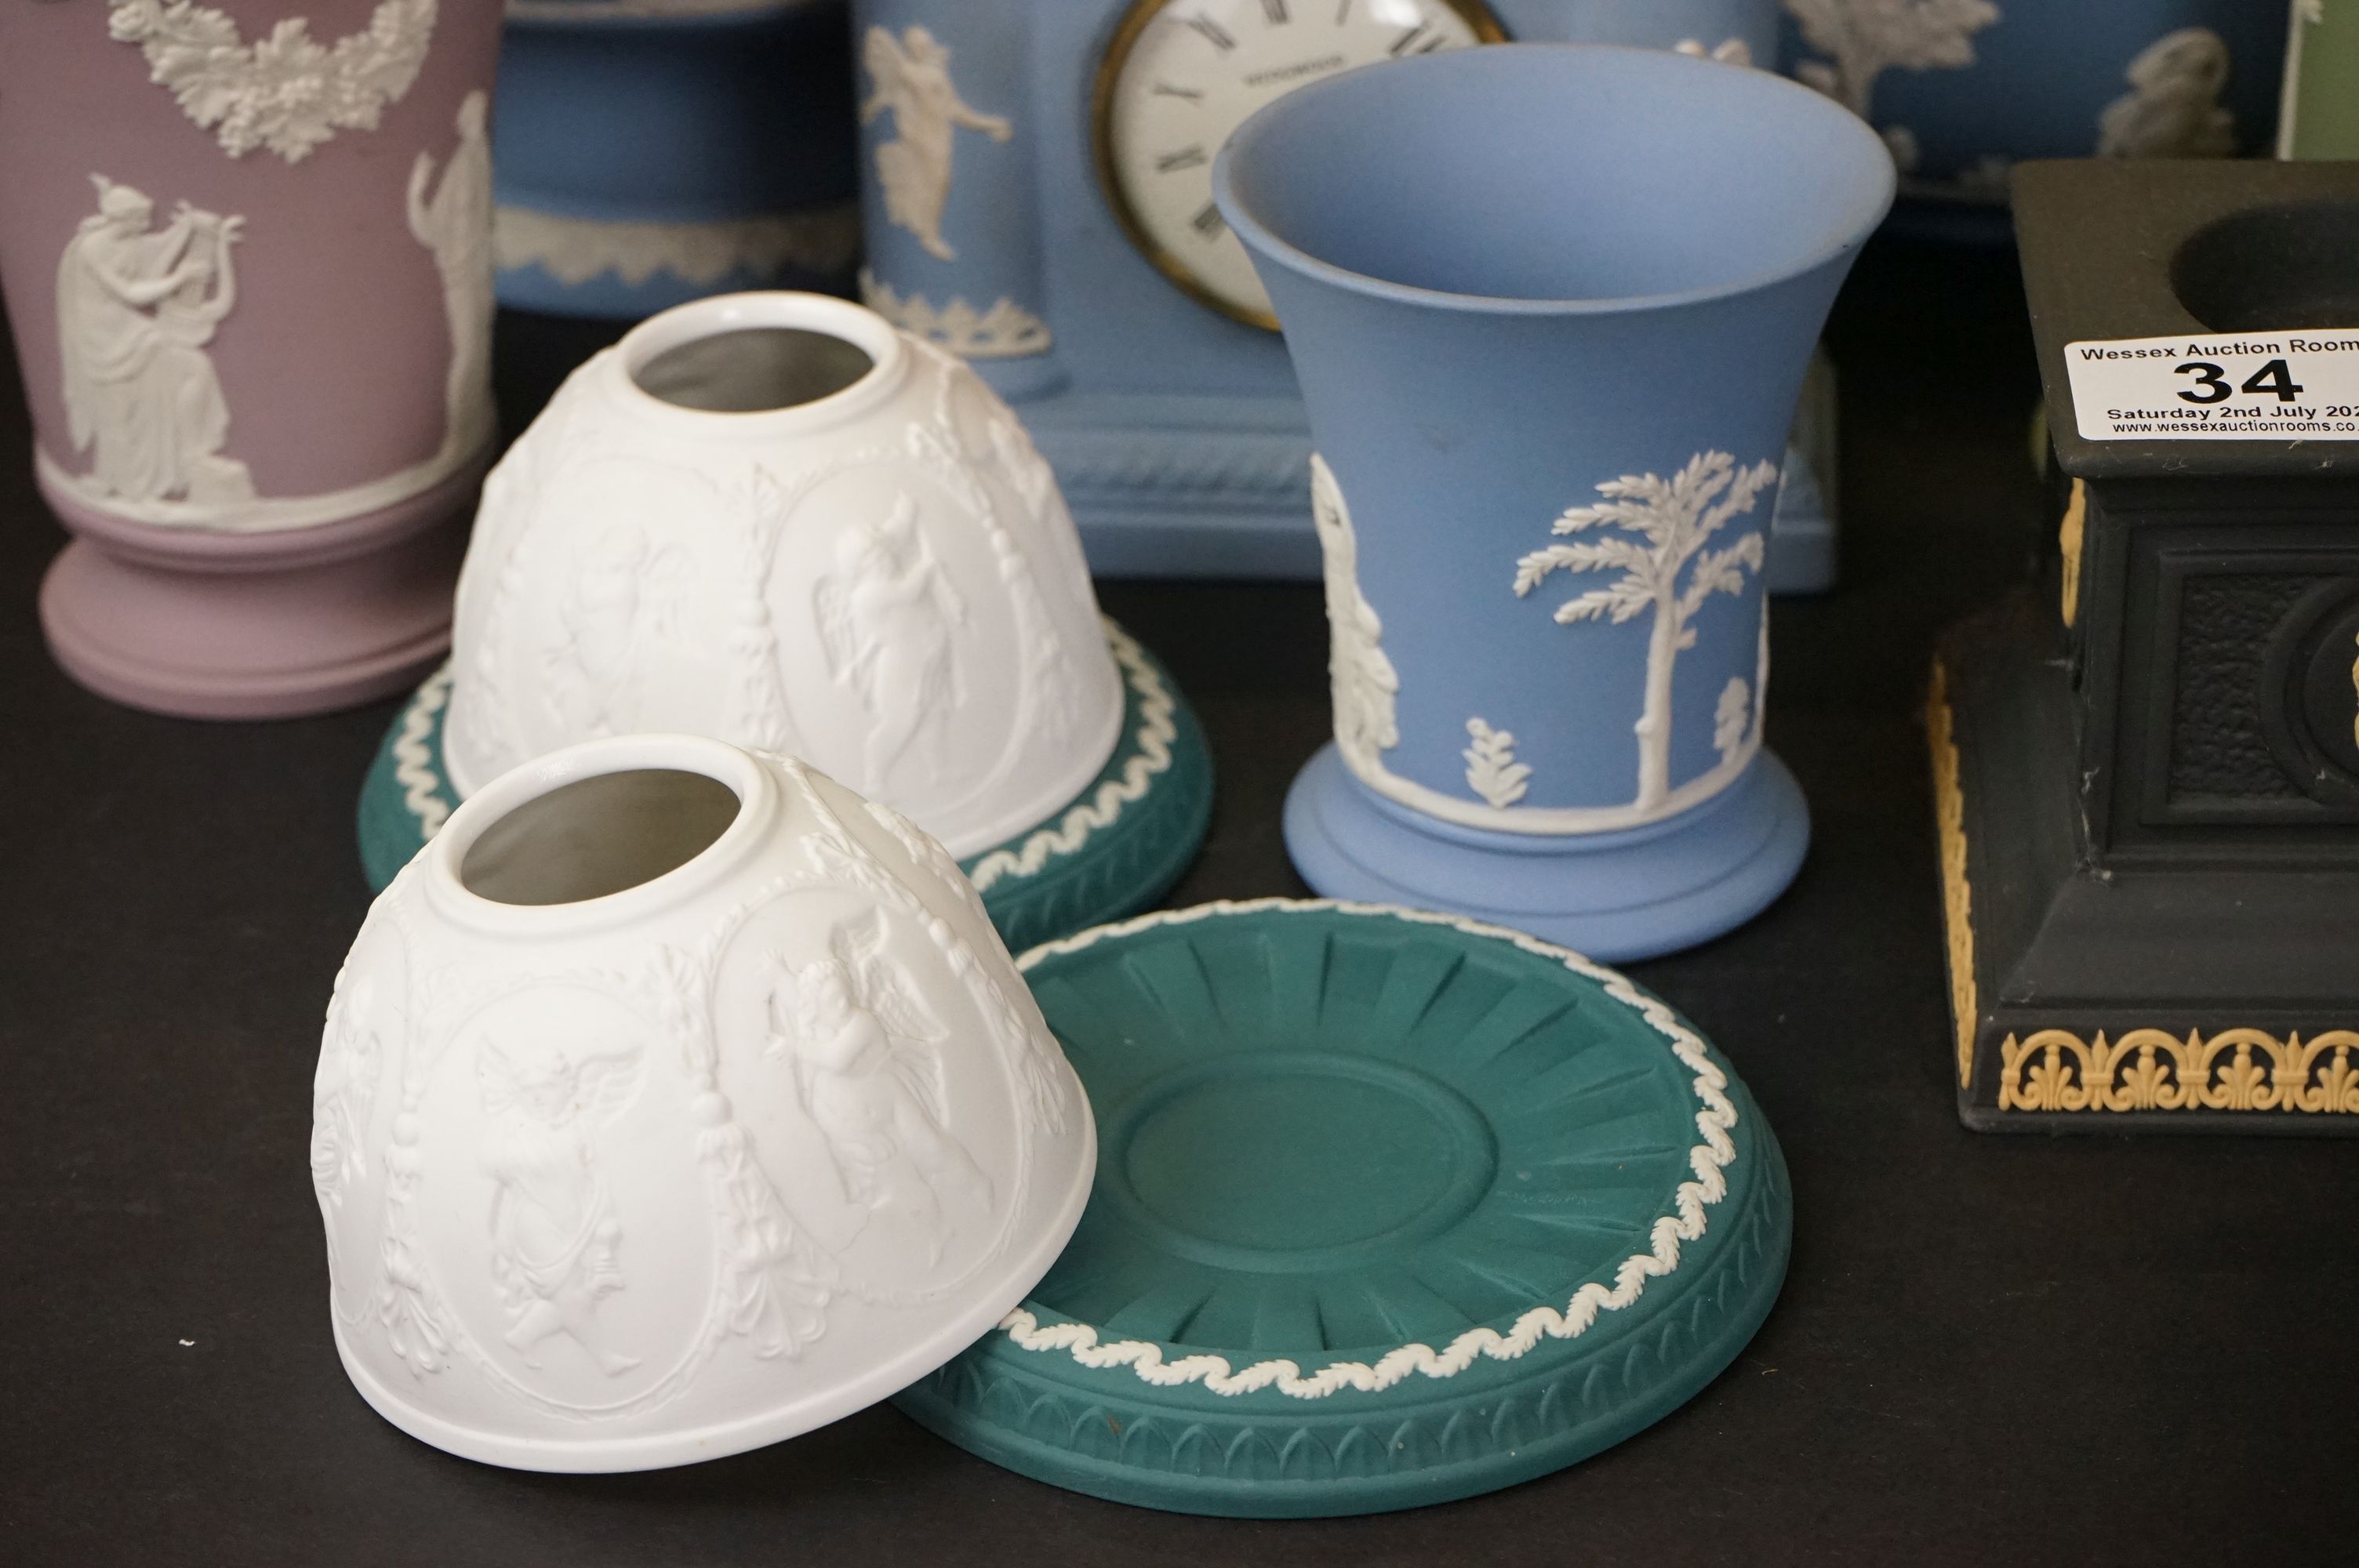 Quantity of Wedgwood Jasperware - to include a quartz mantle clock, bowl, tazza, a pair of - Image 2 of 8